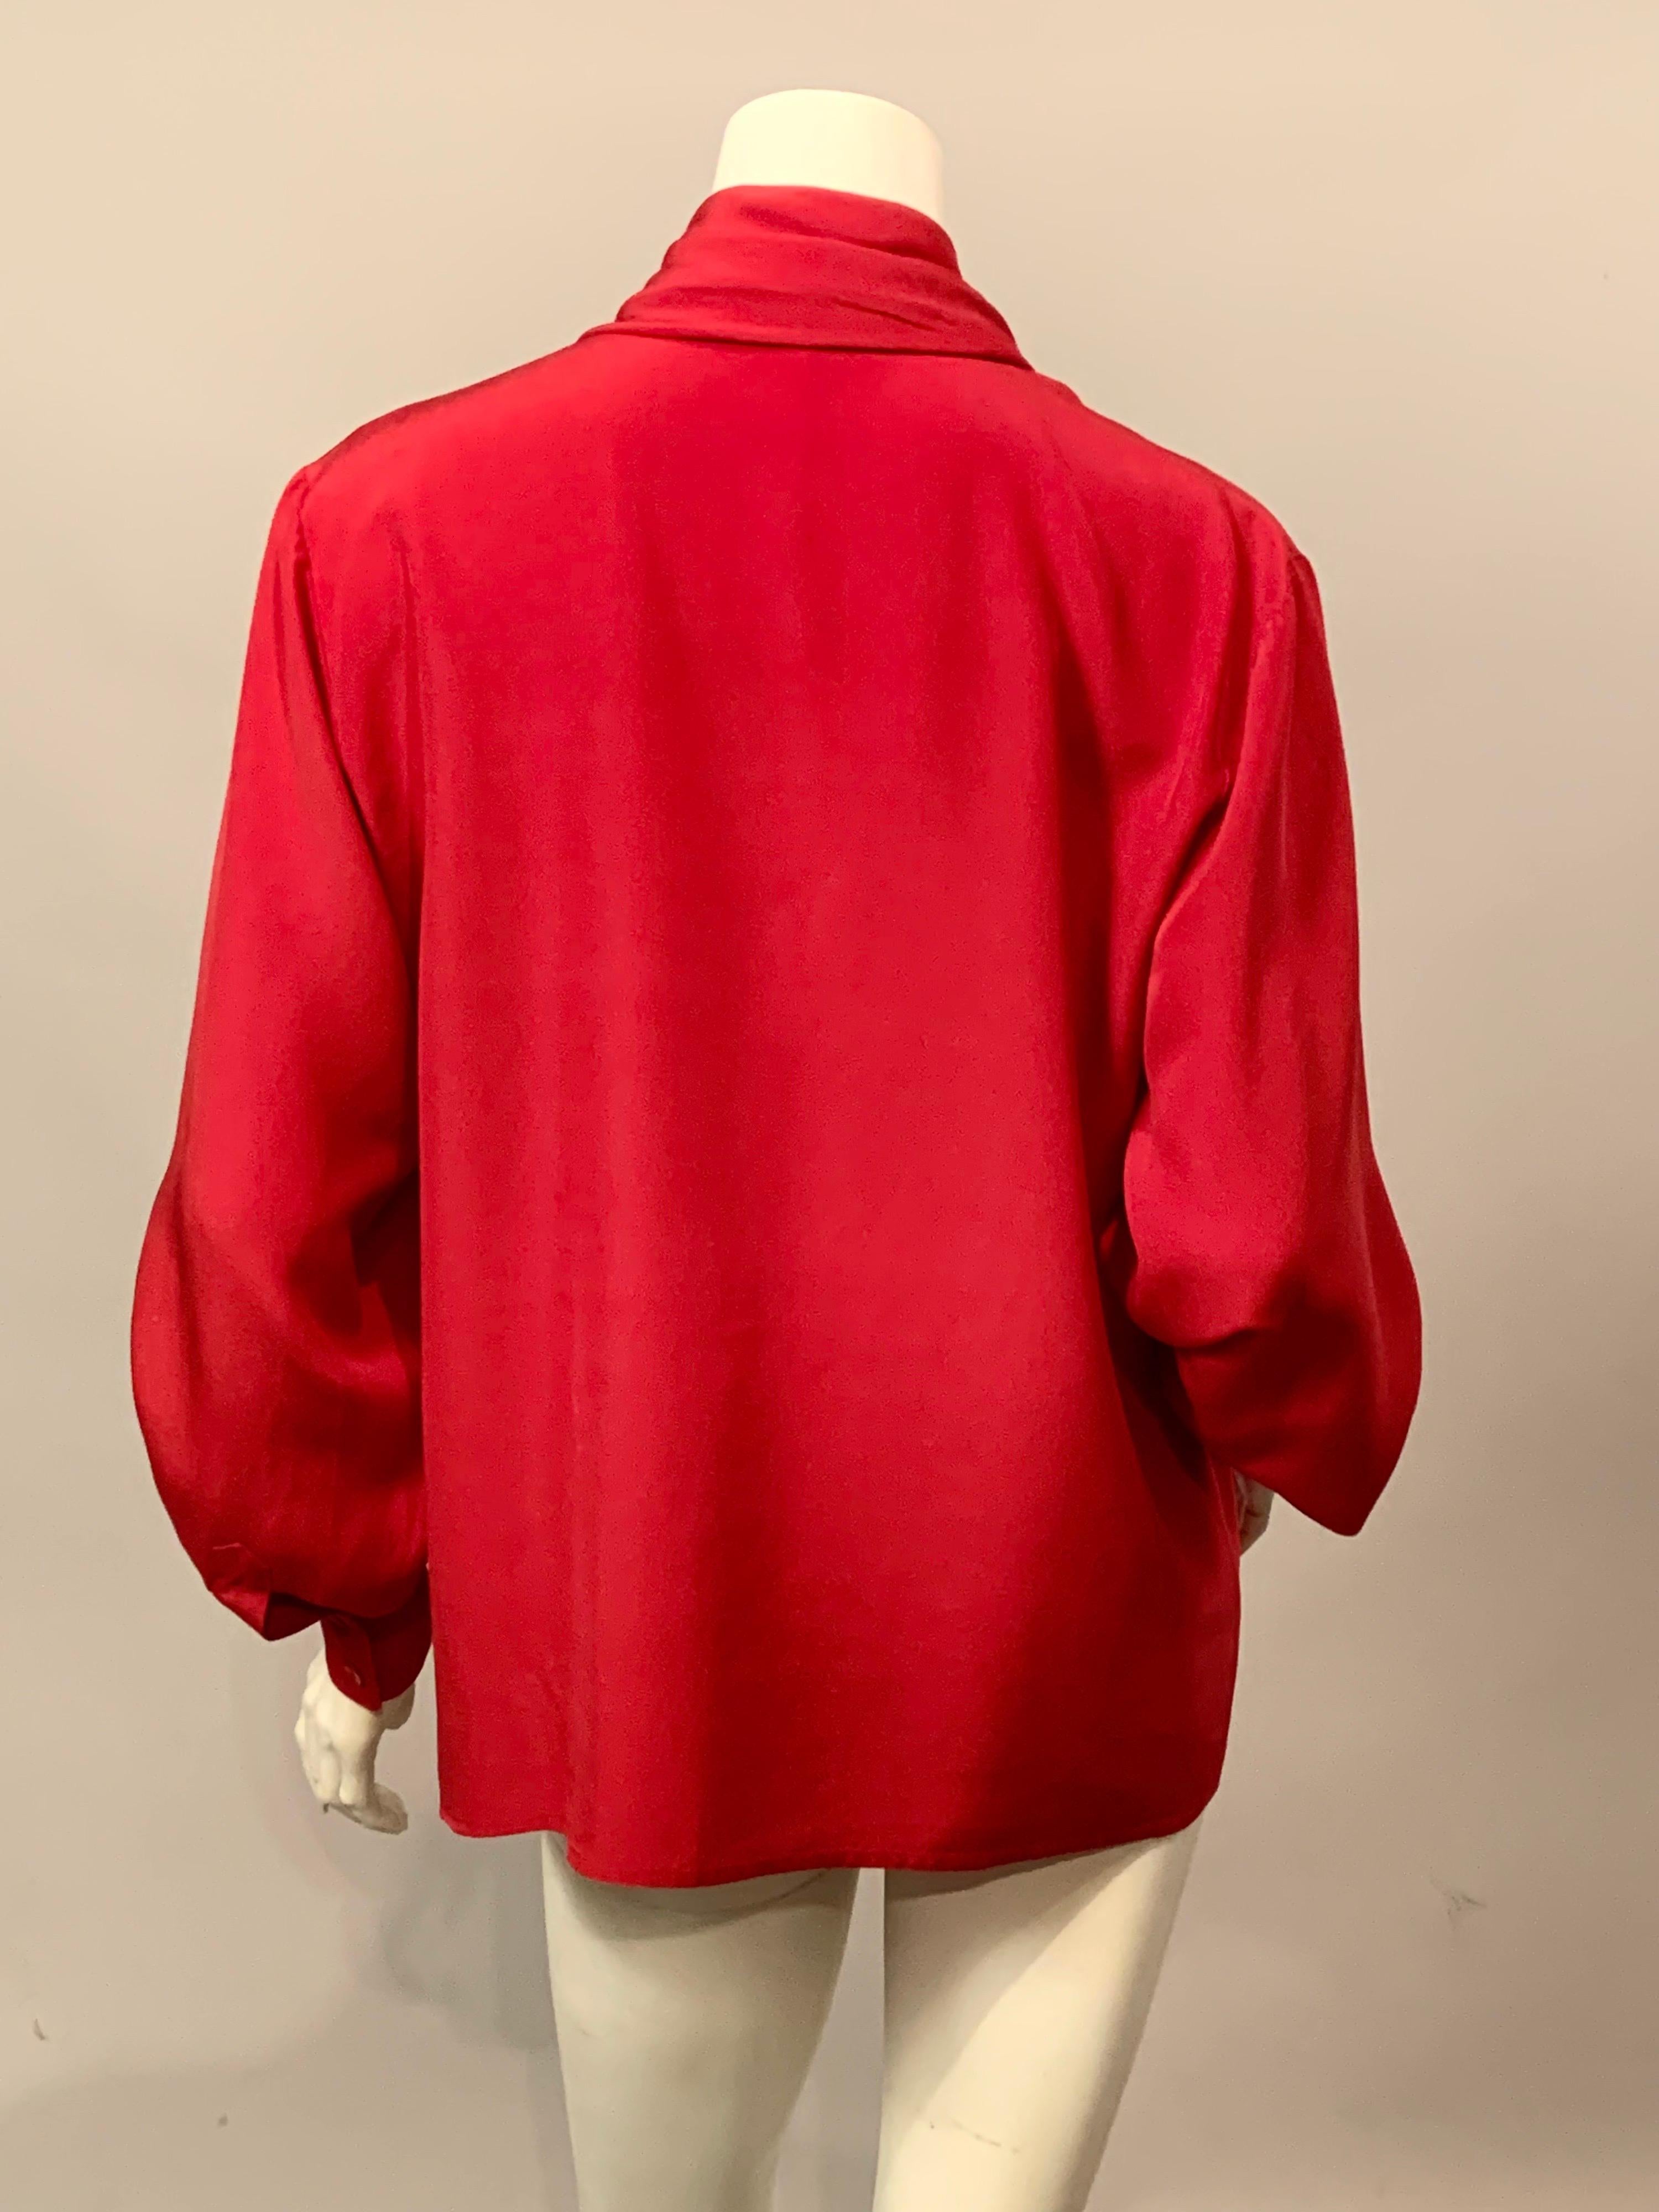 Yves Saint Laurent Red Silk Blouse with Scarf Tie Neckline For Sale 1